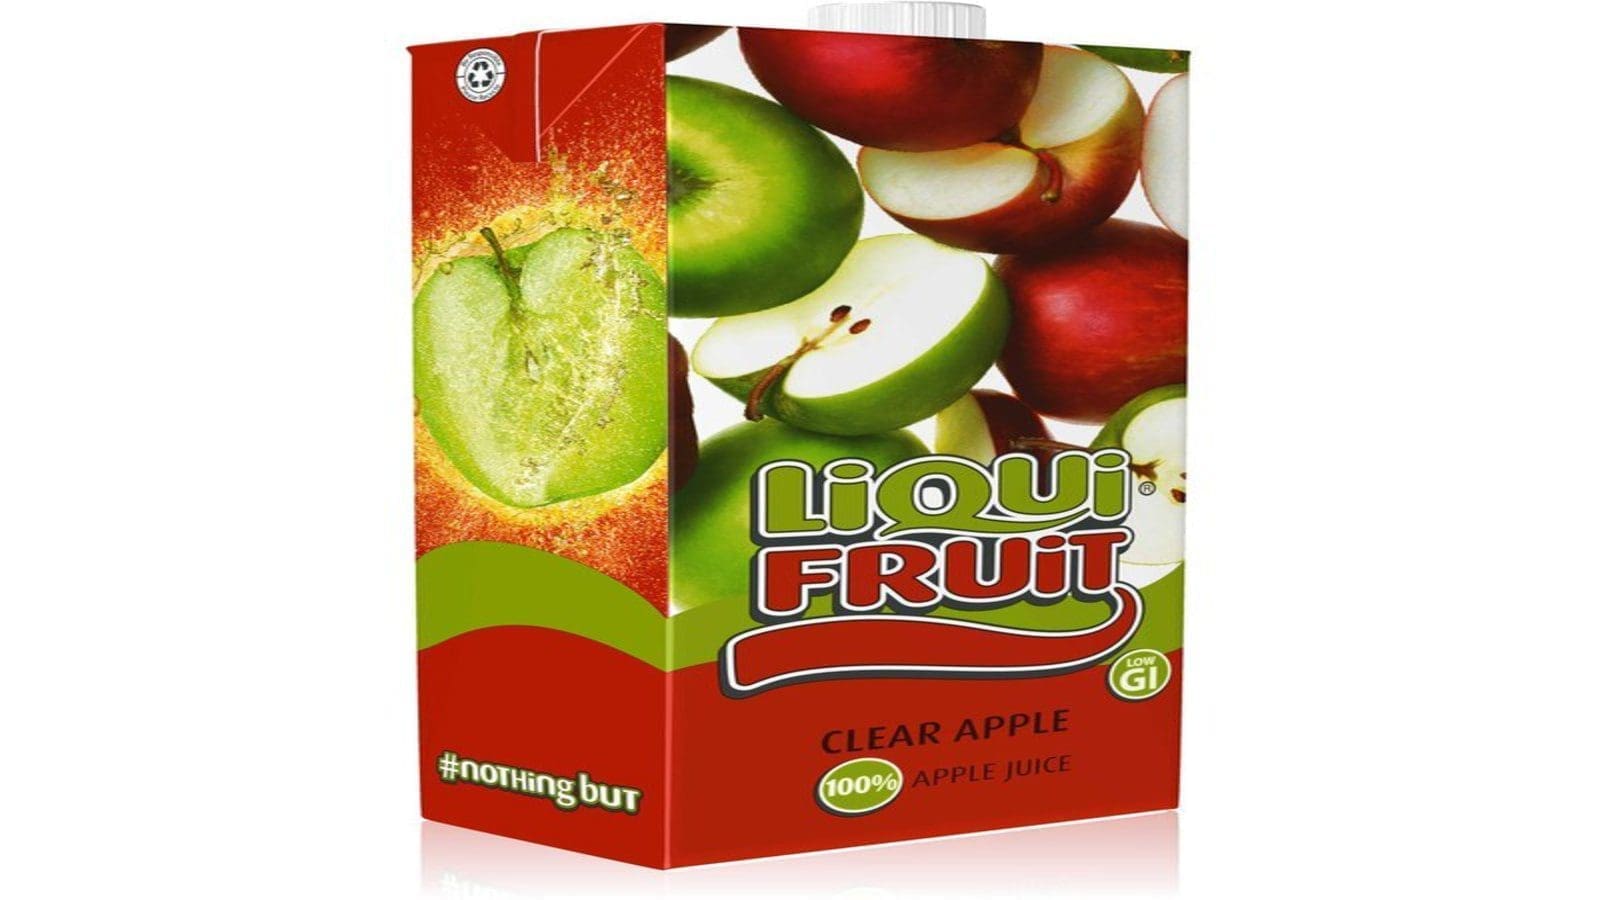 South Africa’s Pioneer Foods recalls LiquiFruit, Ceres apple juice brands due to mould contamination